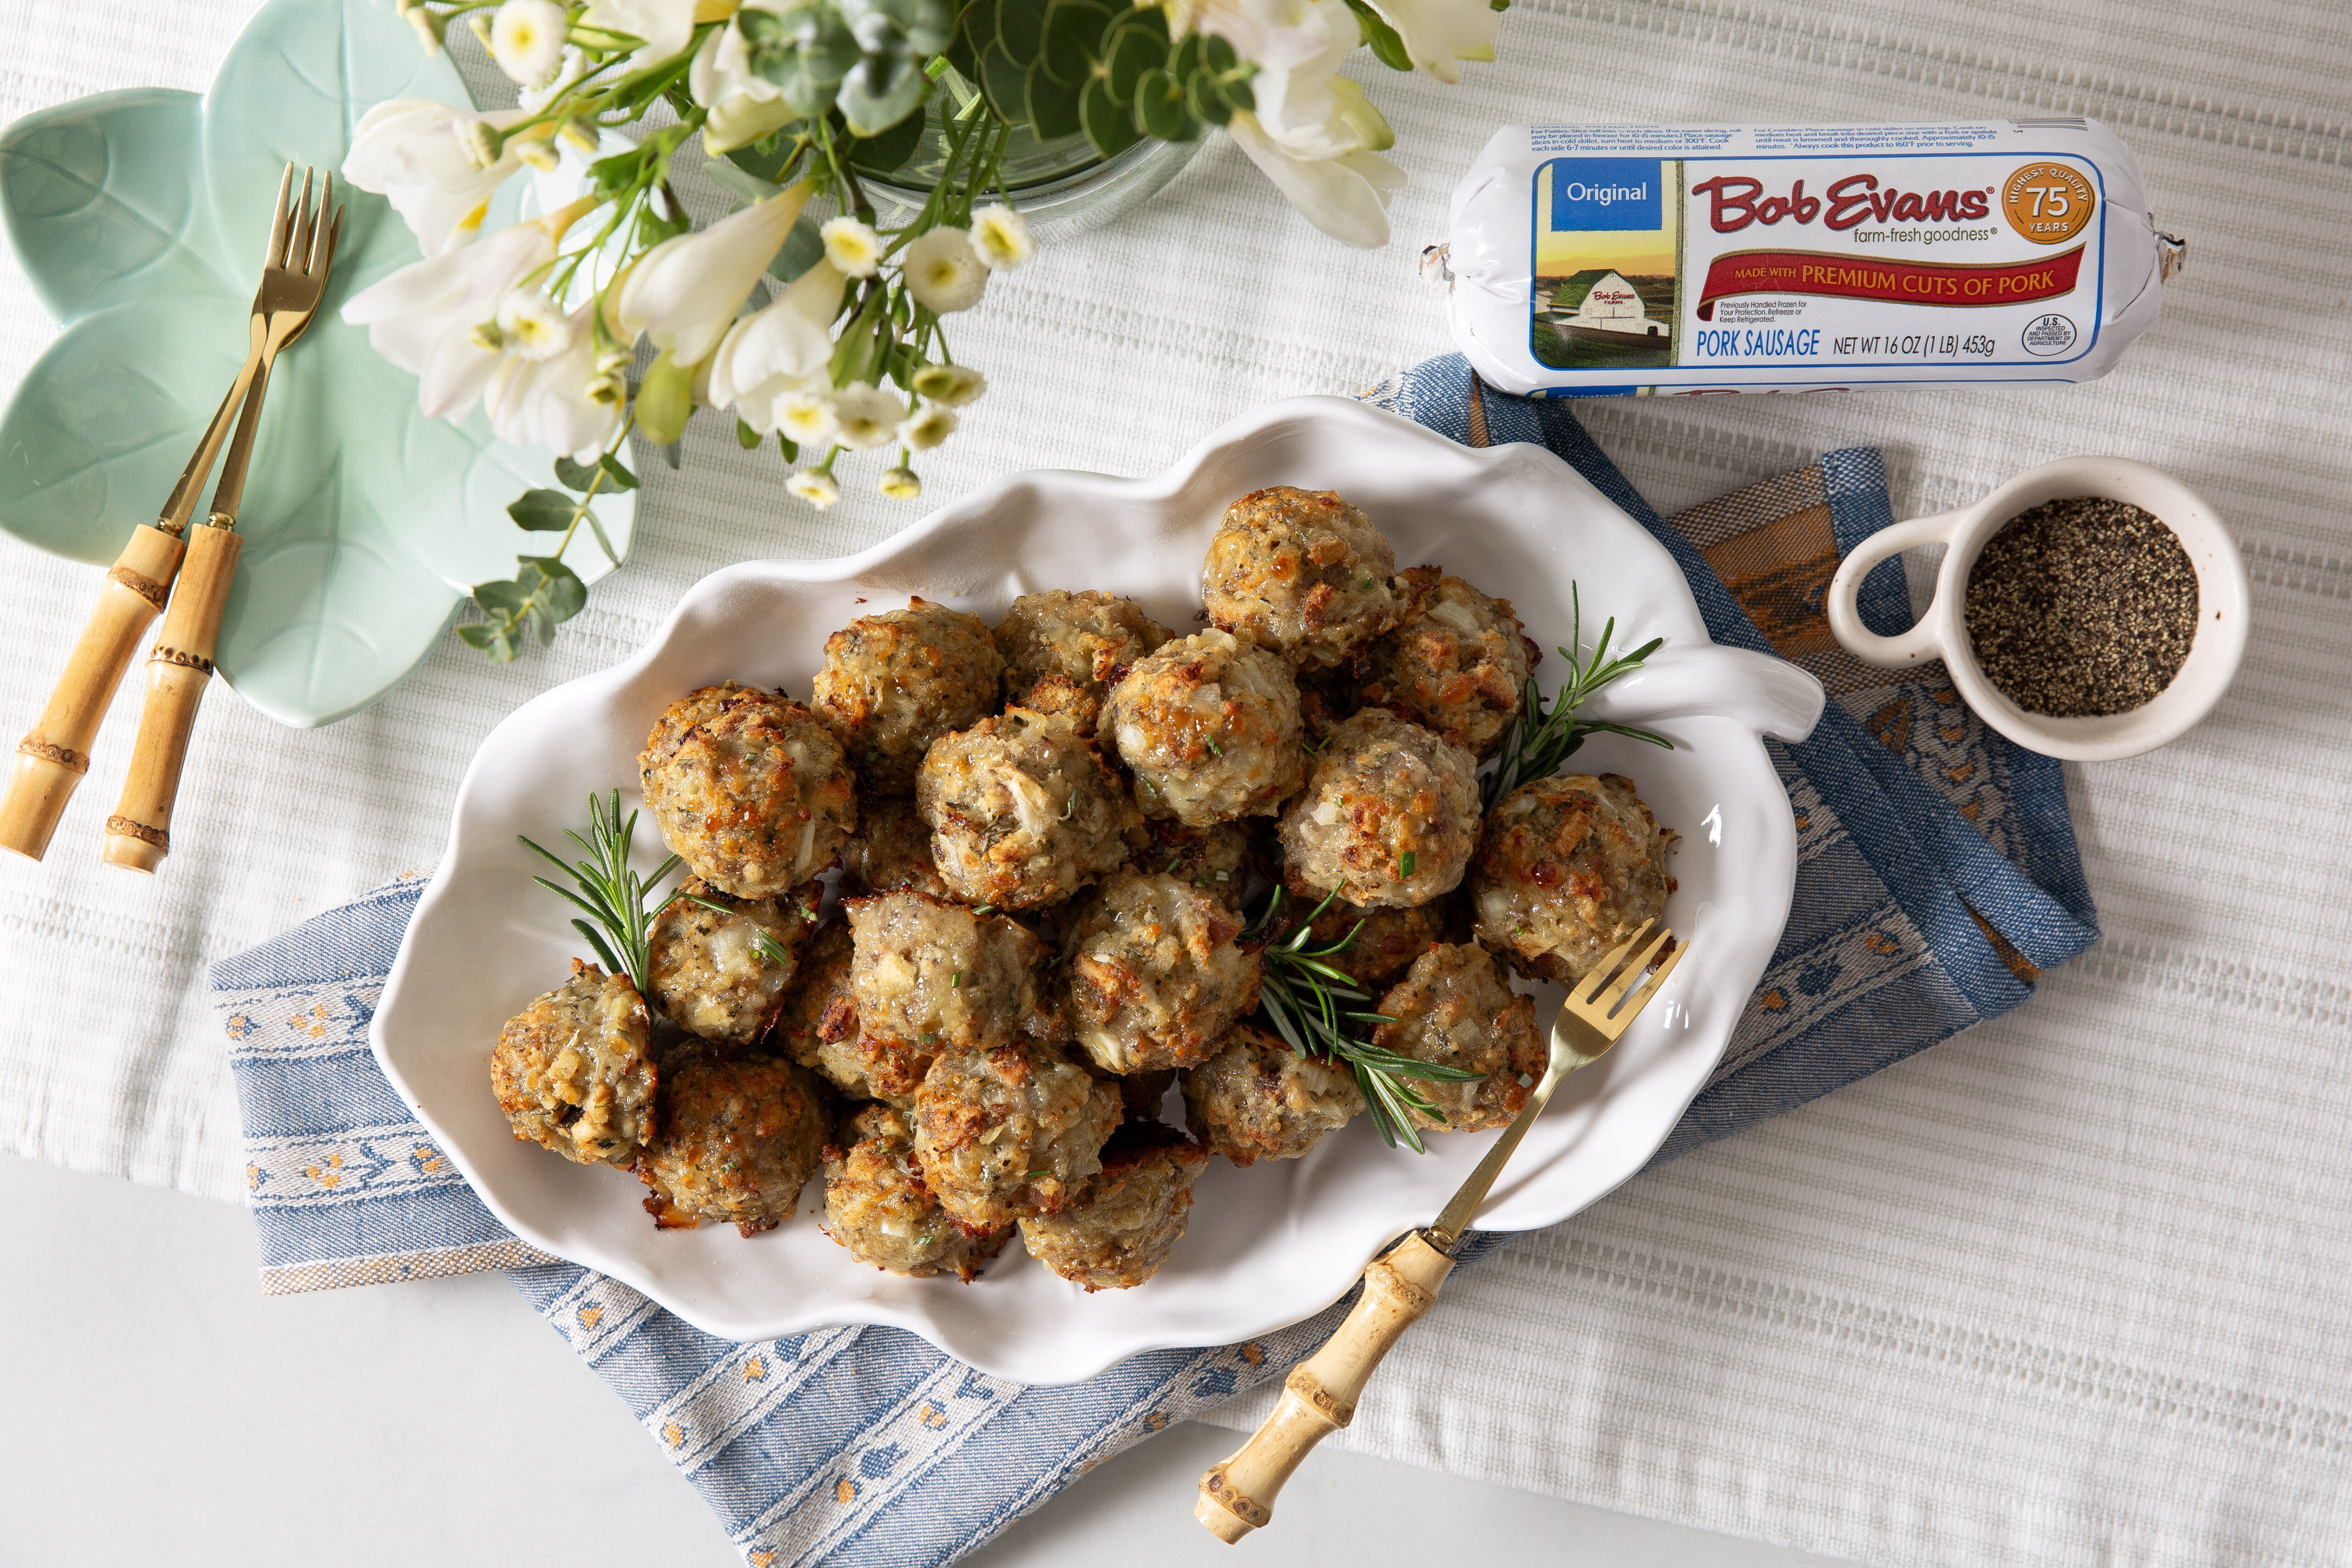 a platter of rosemary sausage balls next to a package of Bob Evans Original Sausage